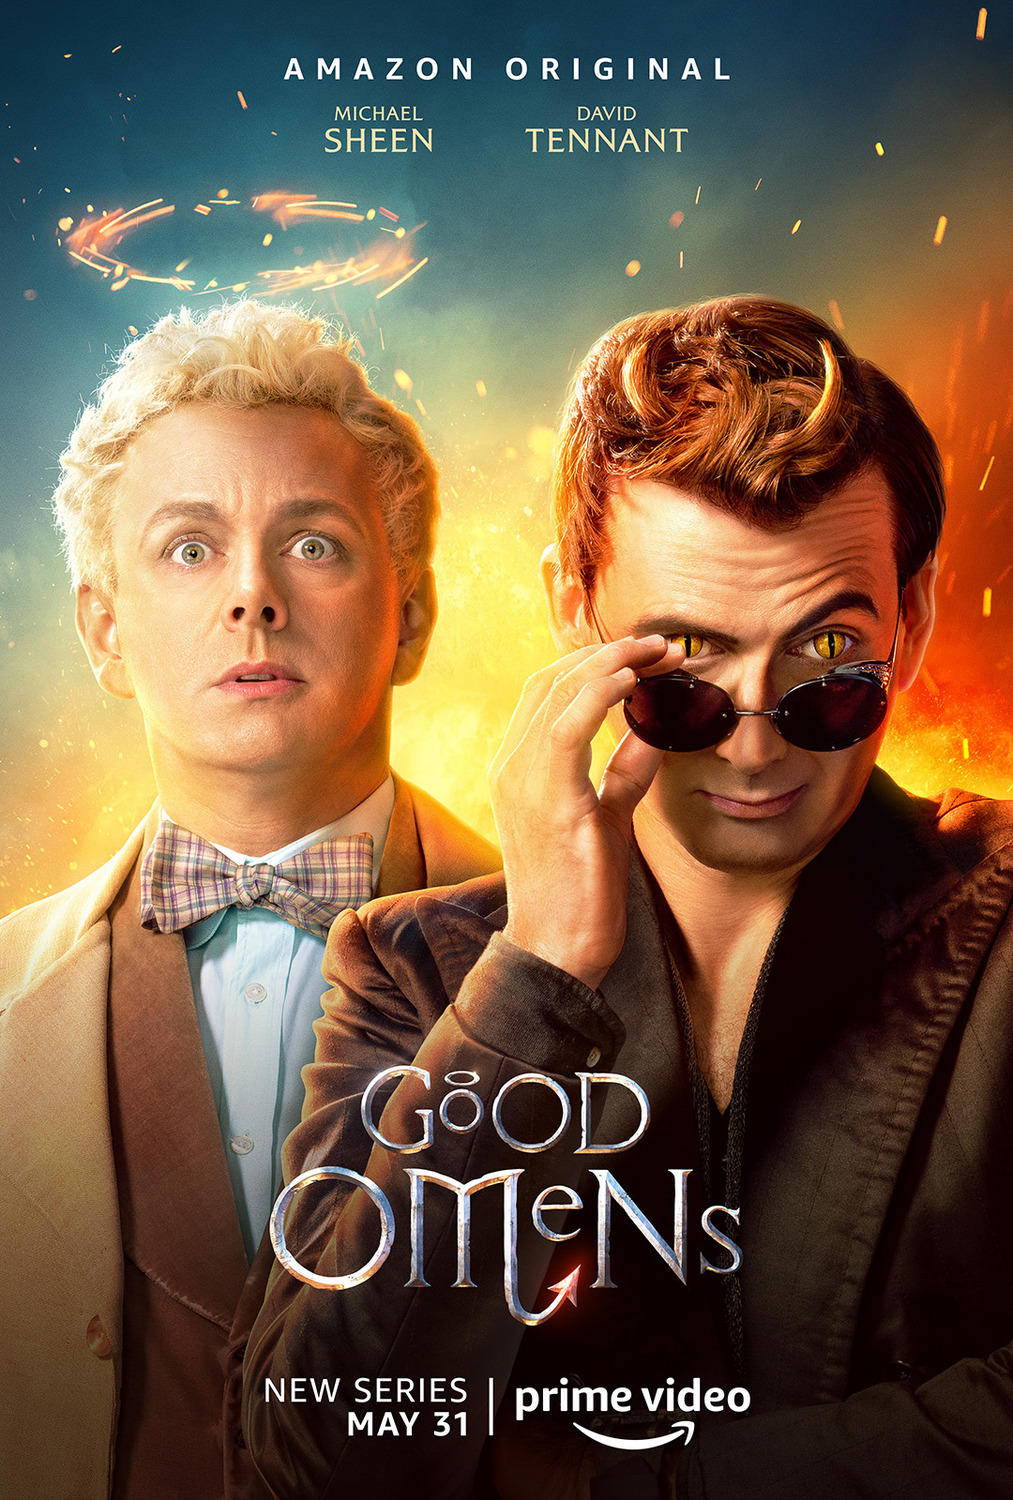 Good Omens review: Welcome to the end times